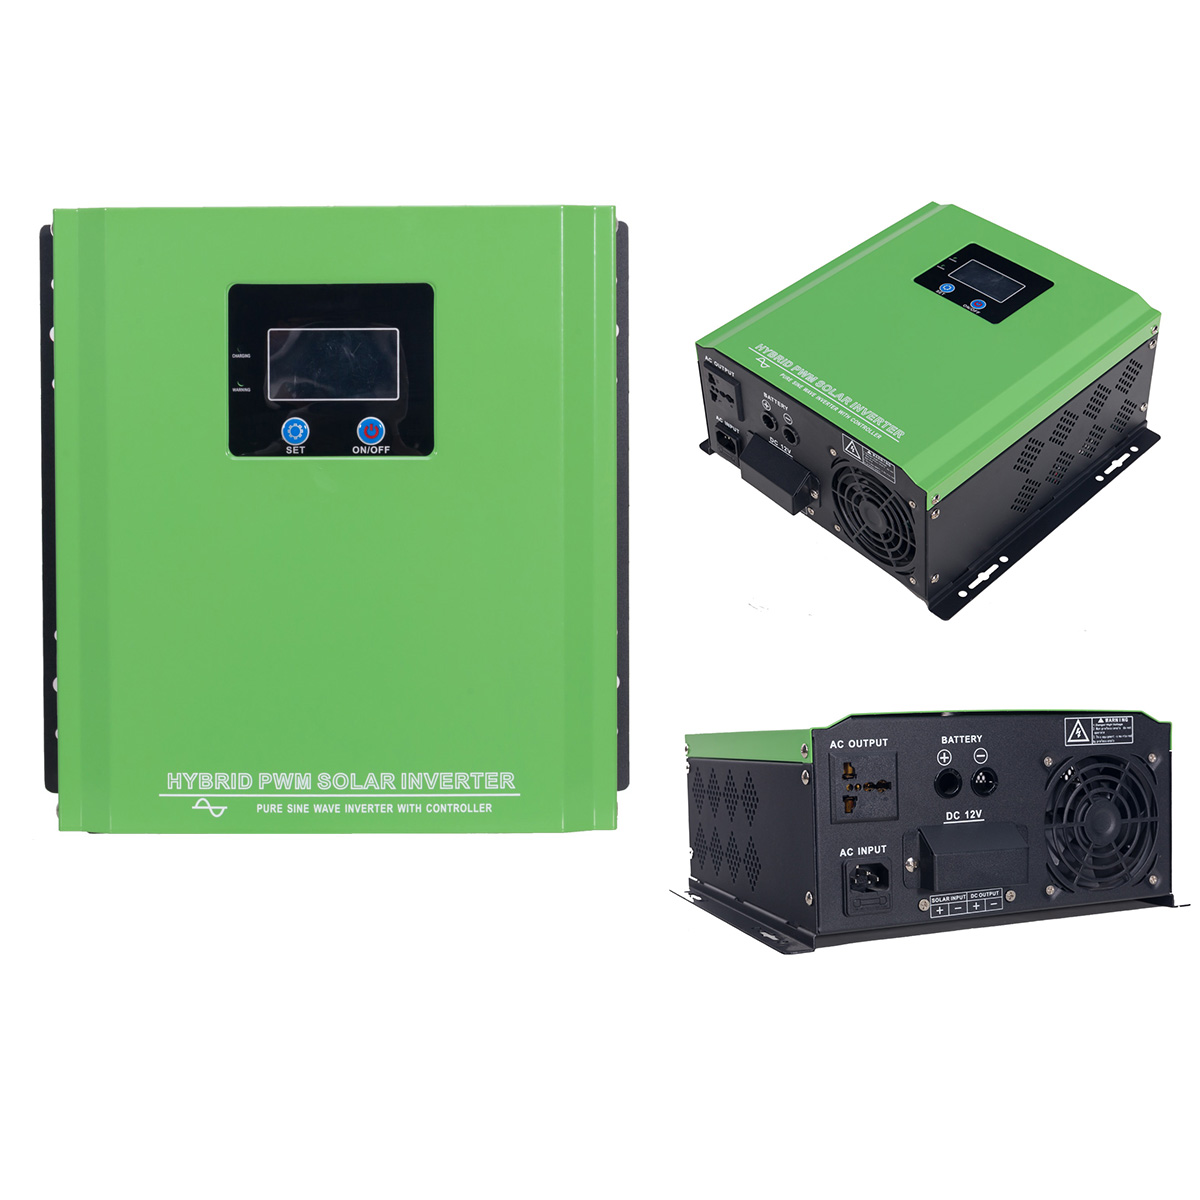 1200W Hybrid Power Inverter with PMW Controller Charger Solar Power System LCD+LED Display